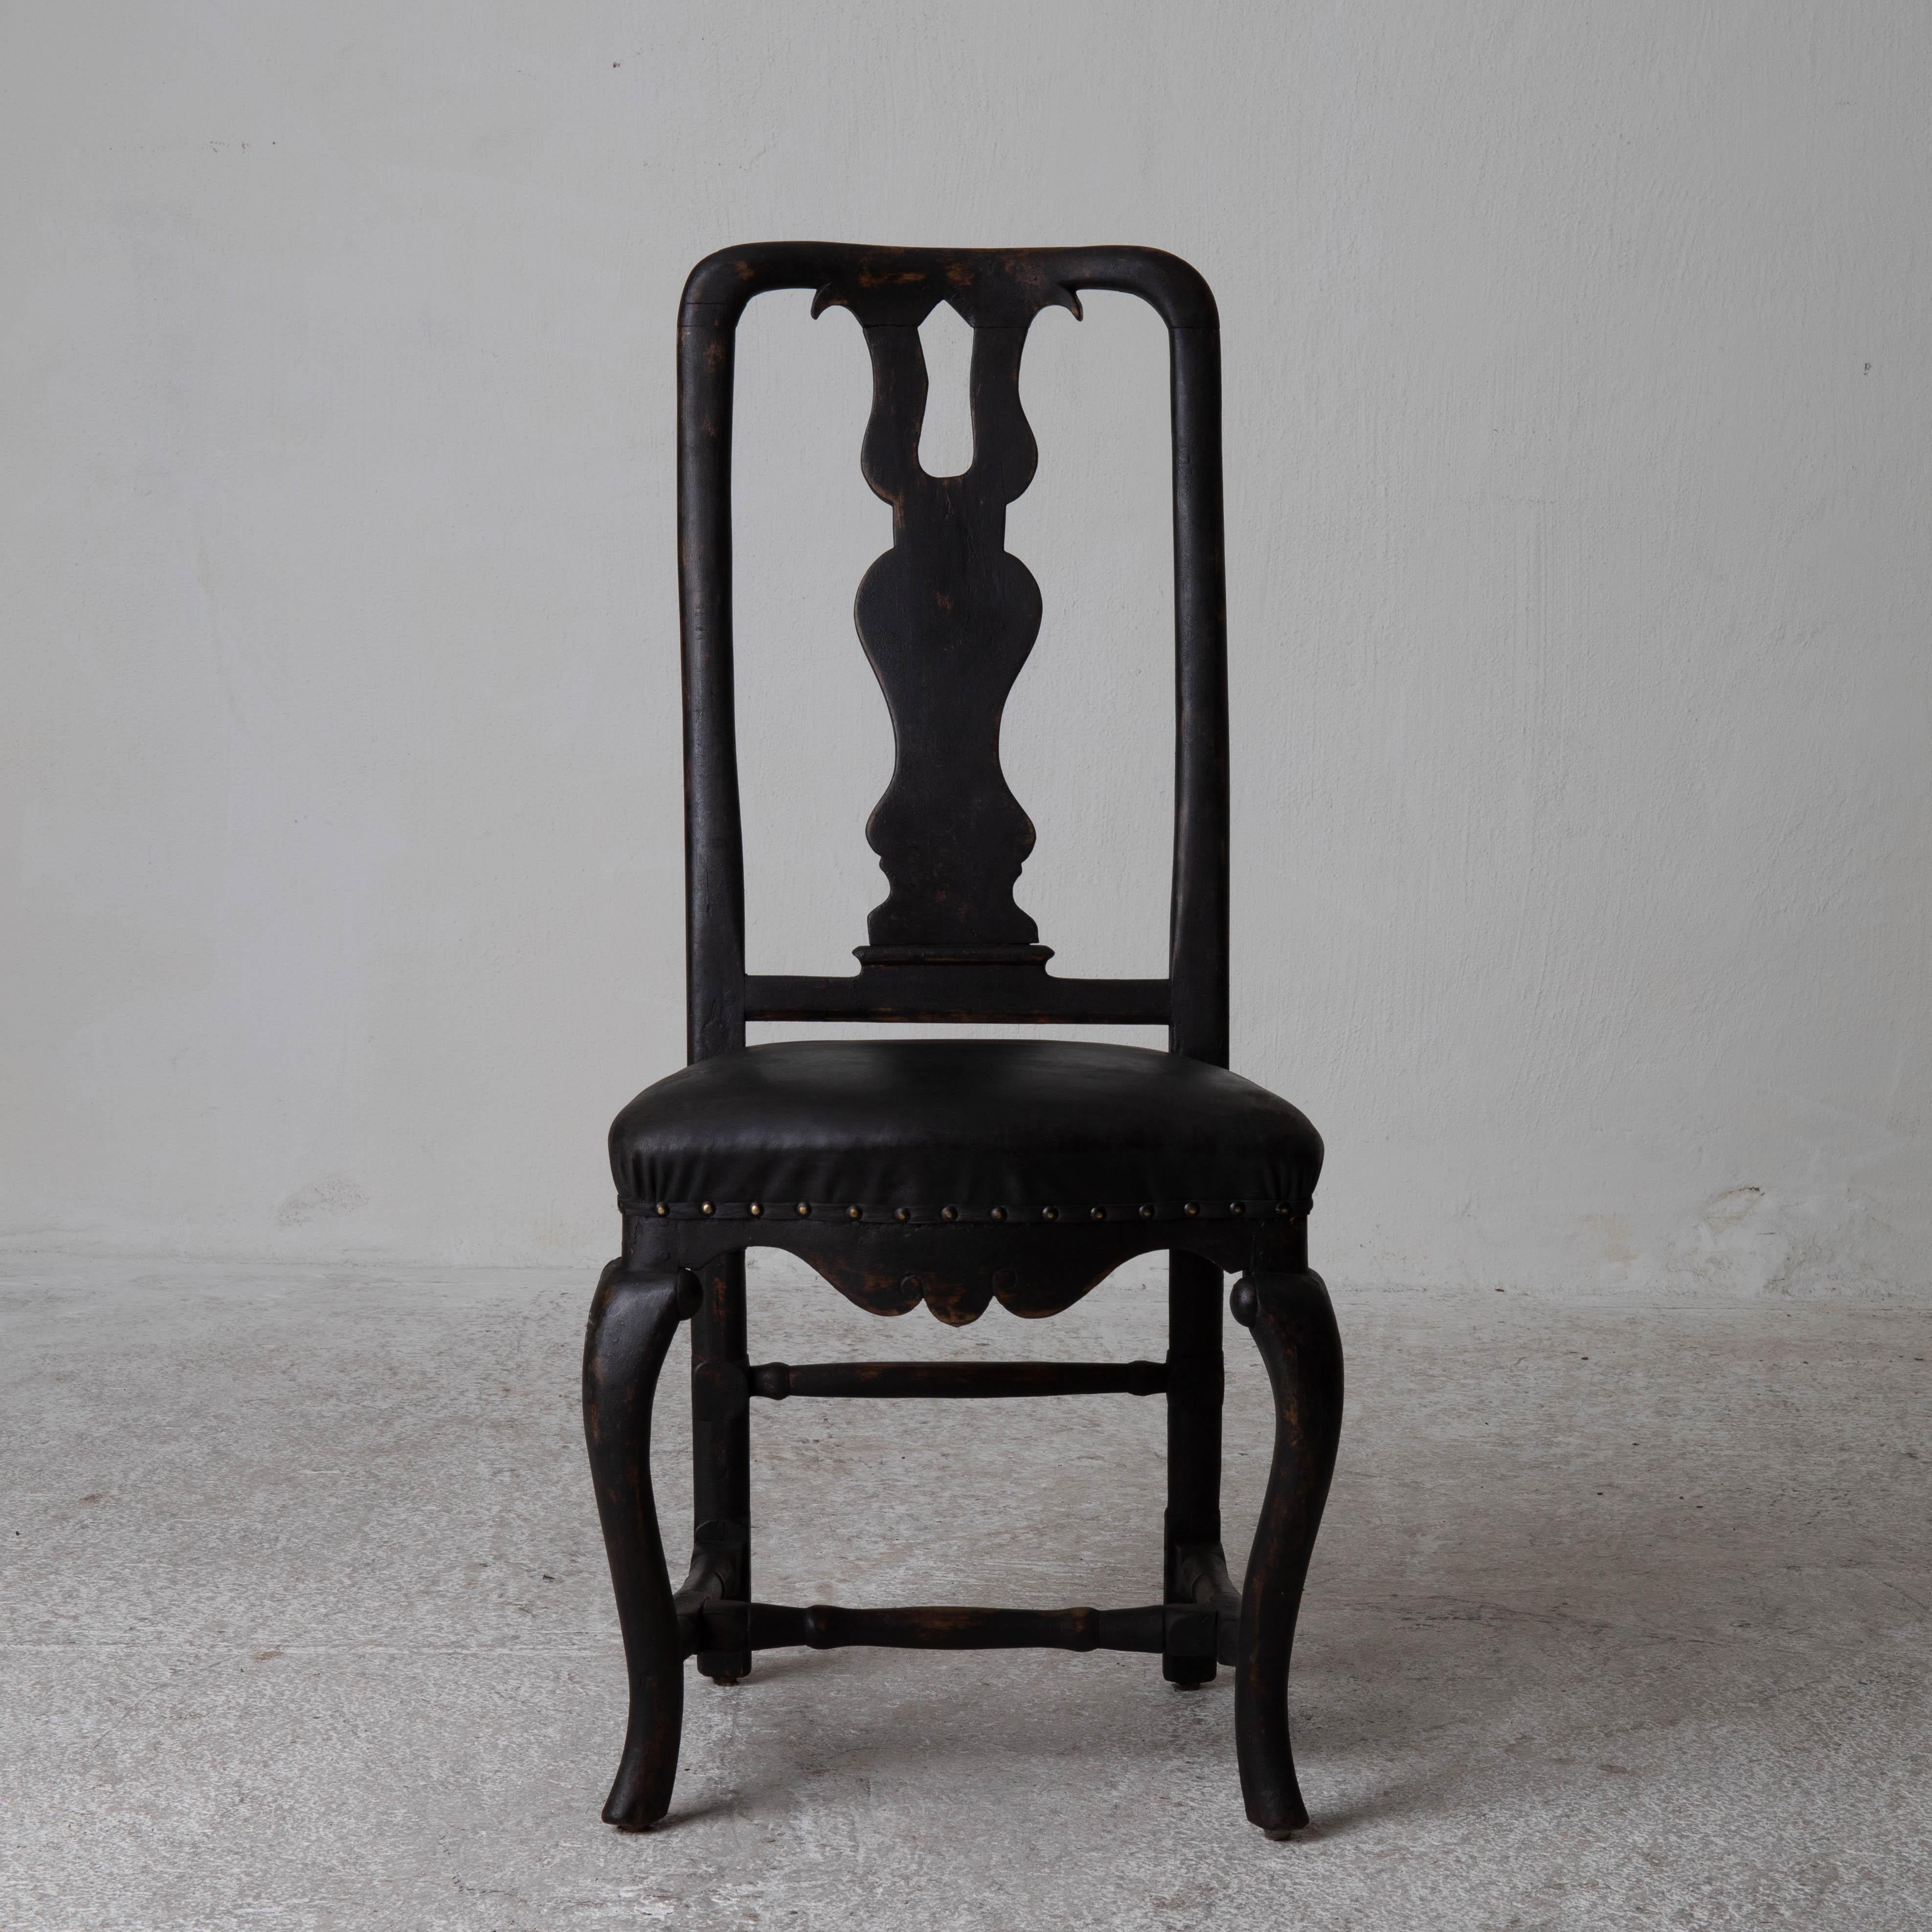 Chairs dining room chairs Swedish Baroque black Sweden. An assembled set of six chairs made during the Baroque period in Sweden. Refinished in our Laserow Black and upholstered in a black vintage leather. Nailhead details.